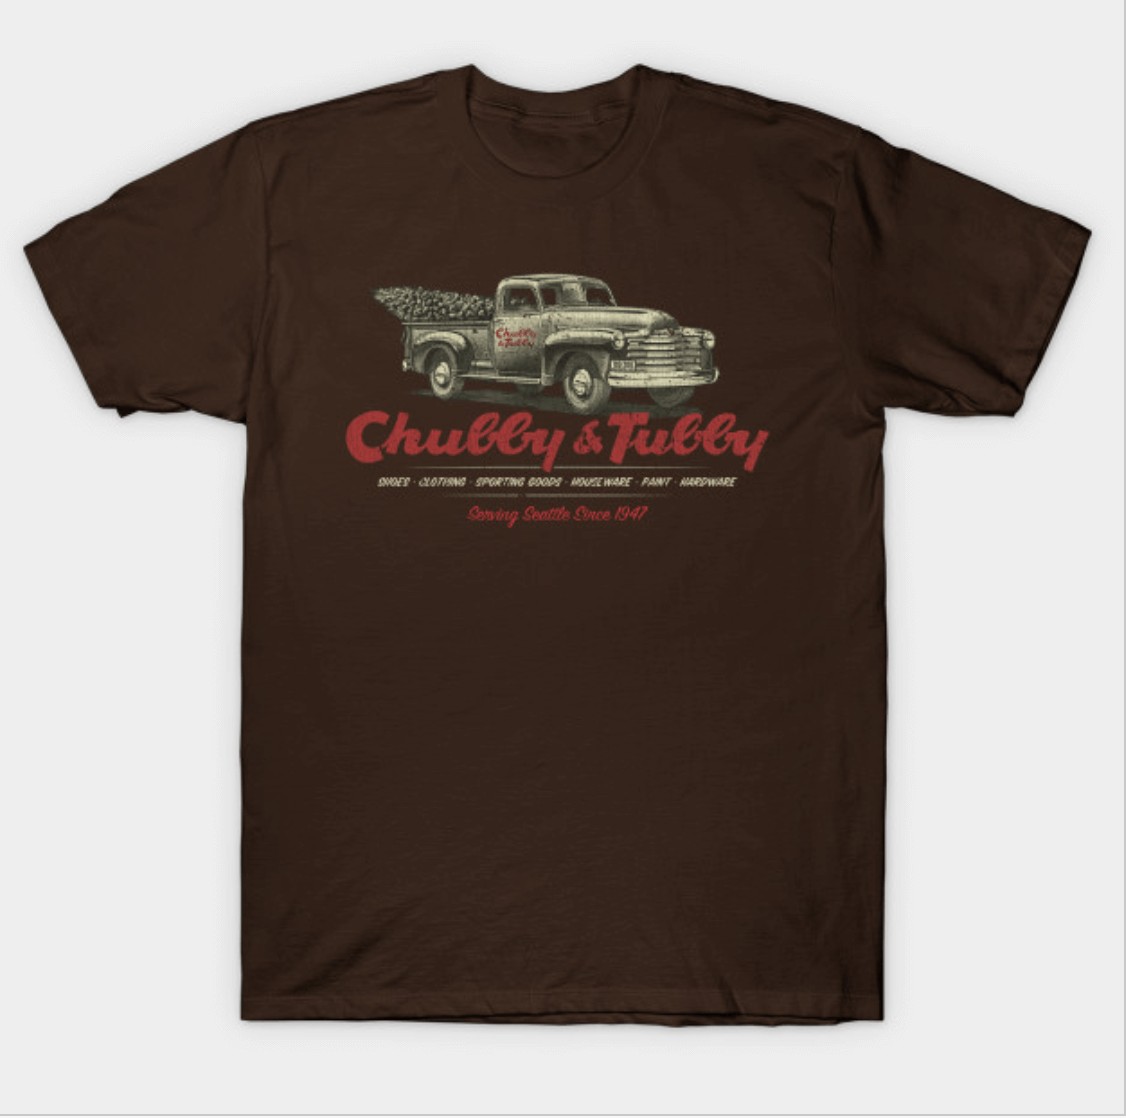 Chubby and Tubby T Shirt